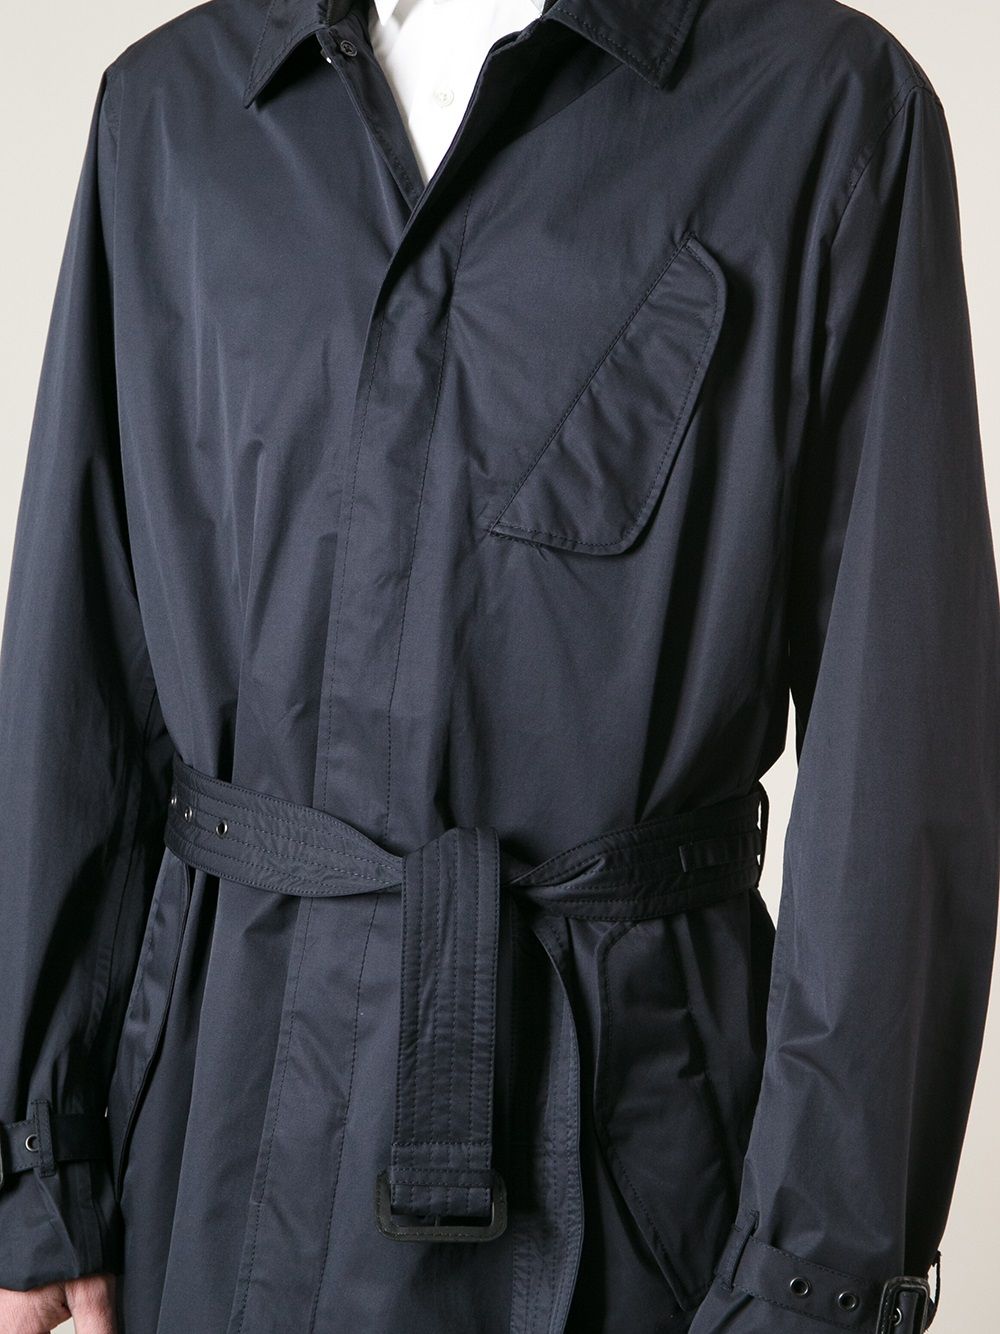 Lyst - Emporio Armani Belted Trench Coat in Blue for Men